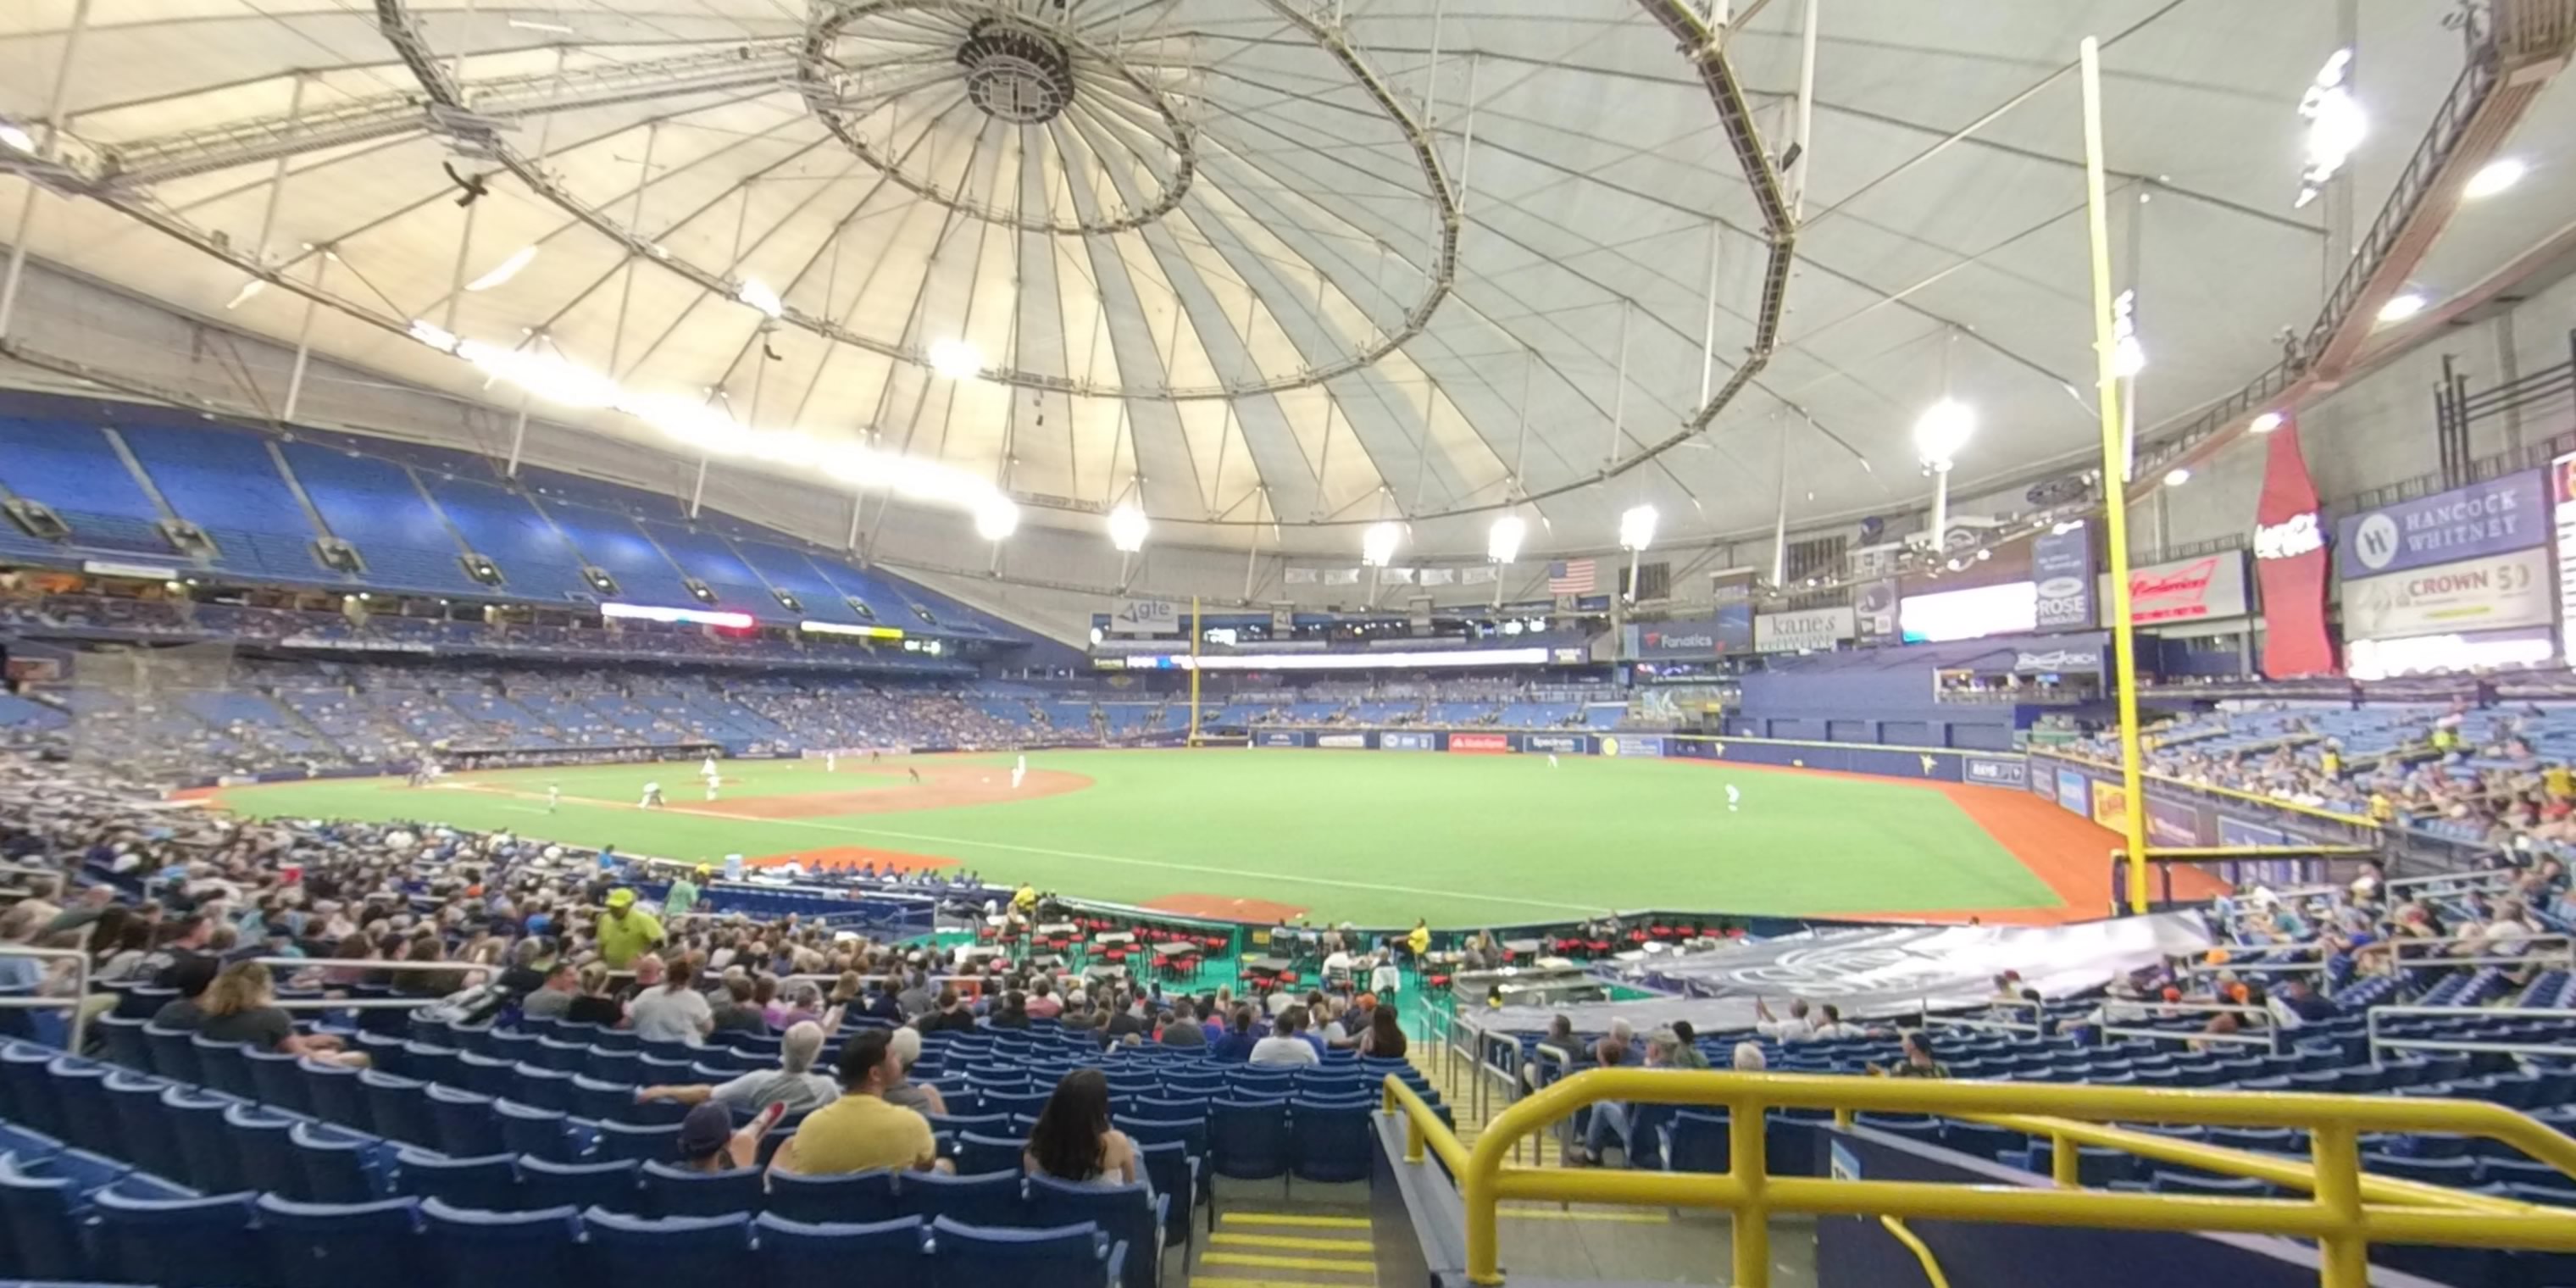 section 134 panoramic seat view  for baseball - tropicana field